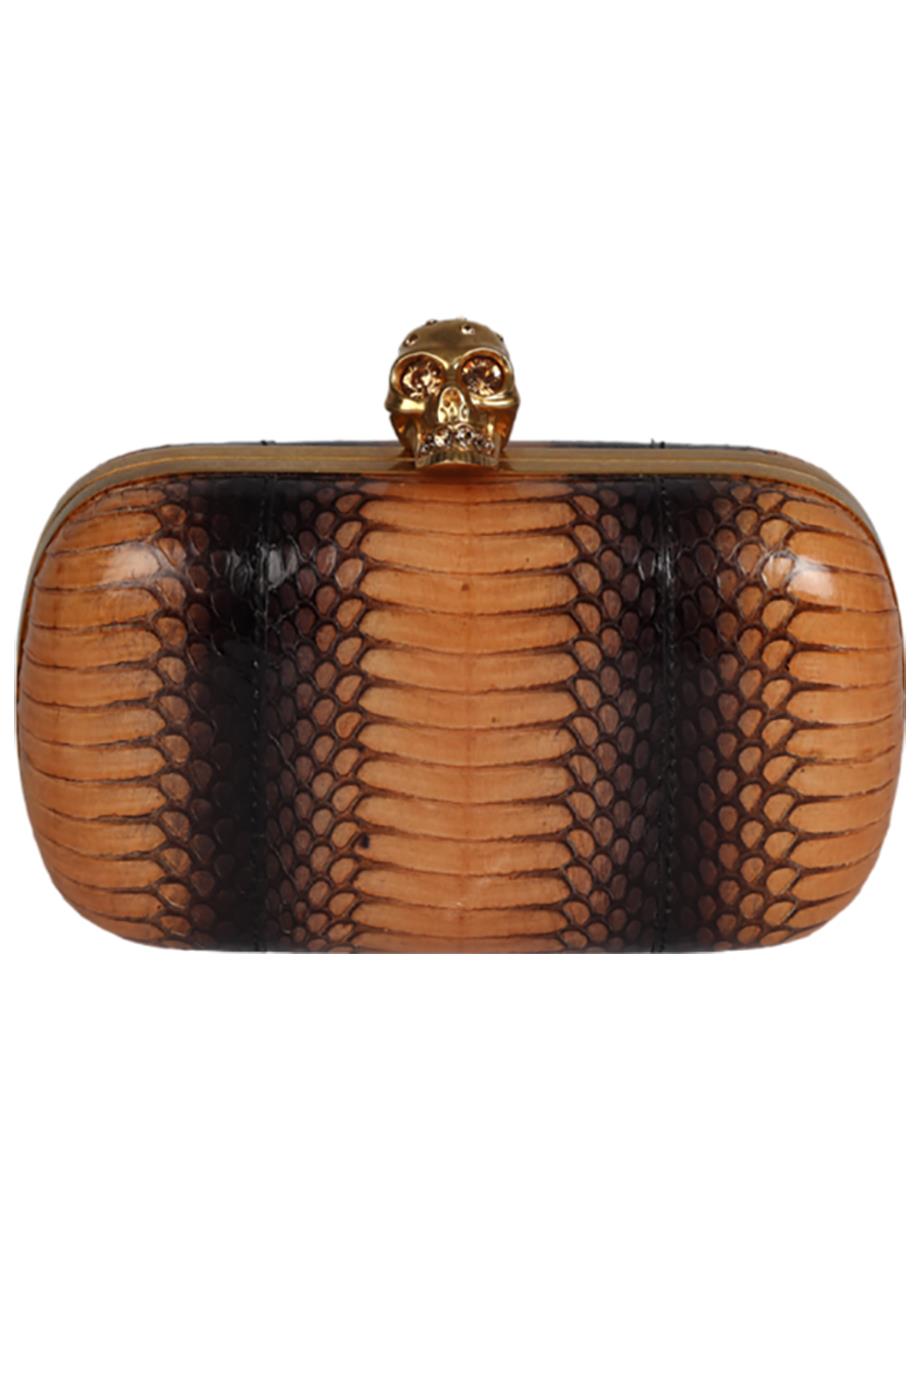 ALEXANDER MCQUEEN SNAKESKIN AND LEATHER CLUTCH